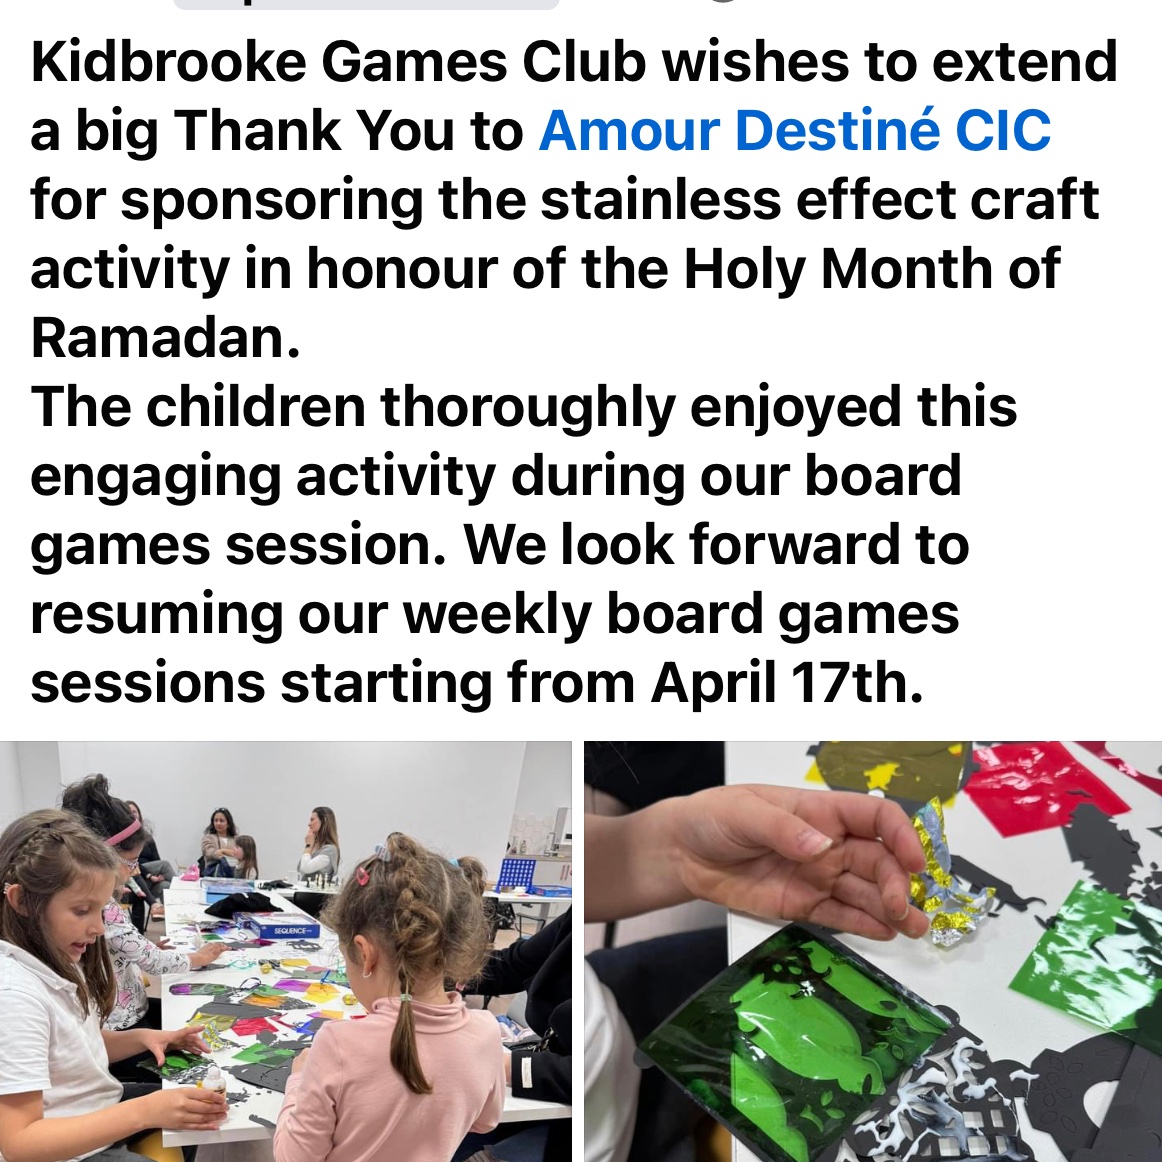 Marshallah the the Kidbrooke Games Club is doing amazing work in the lives of children and their parents on a weekly basis 🤲🏾